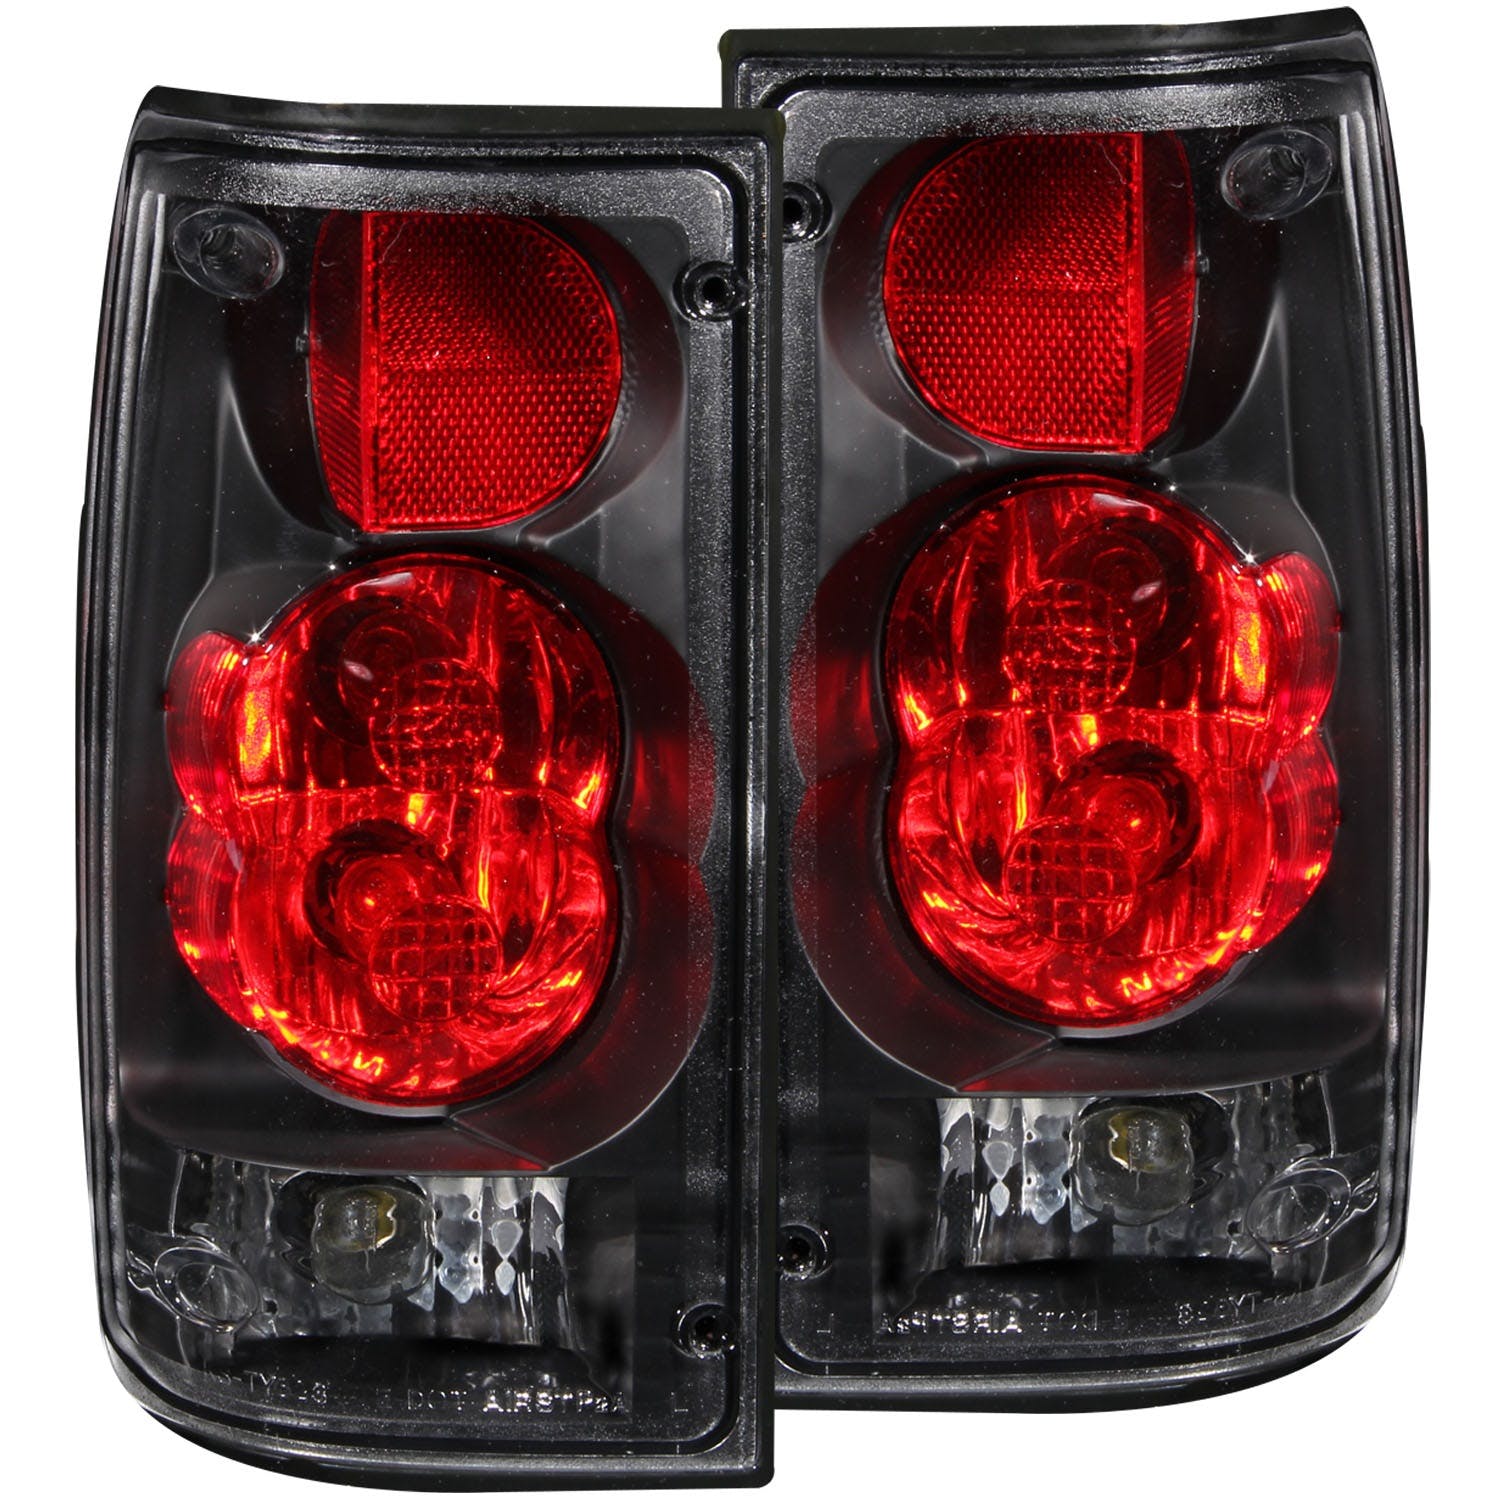 AnzoUSA 211132 Taillights Black